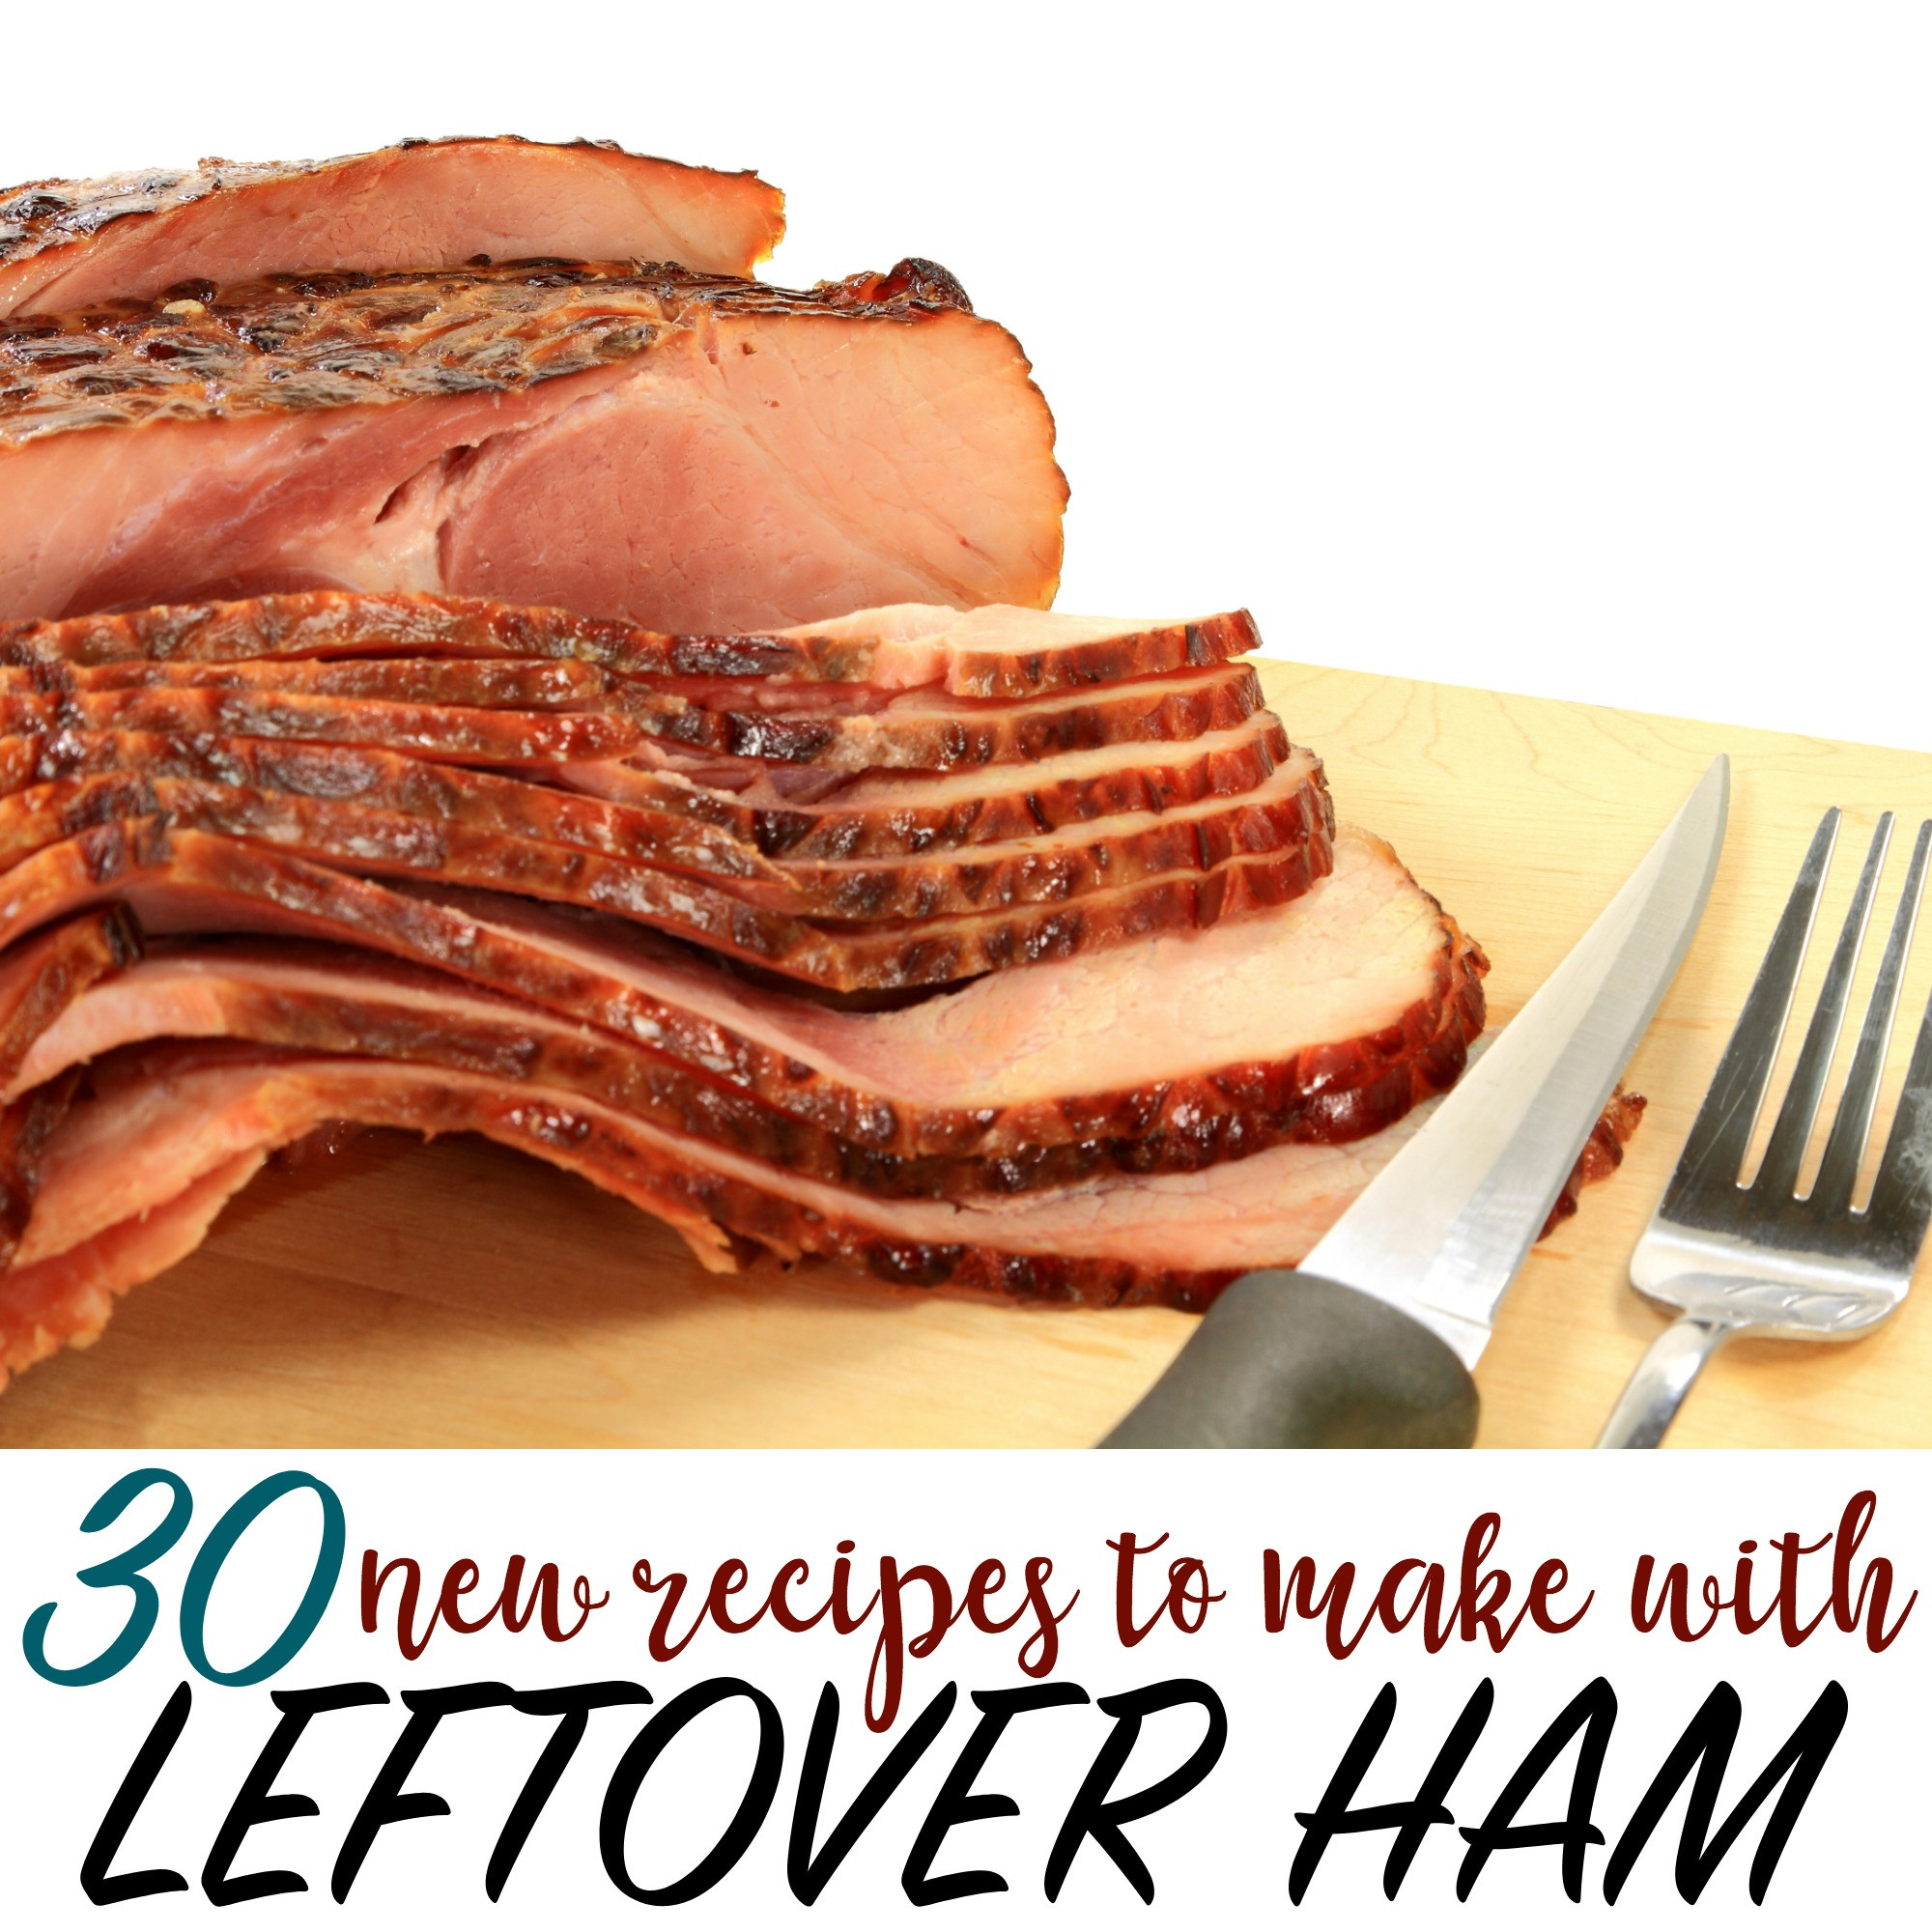 Leftover Easter Ham Recipe
 30 NEW Recipes to Make with Leftover Ham